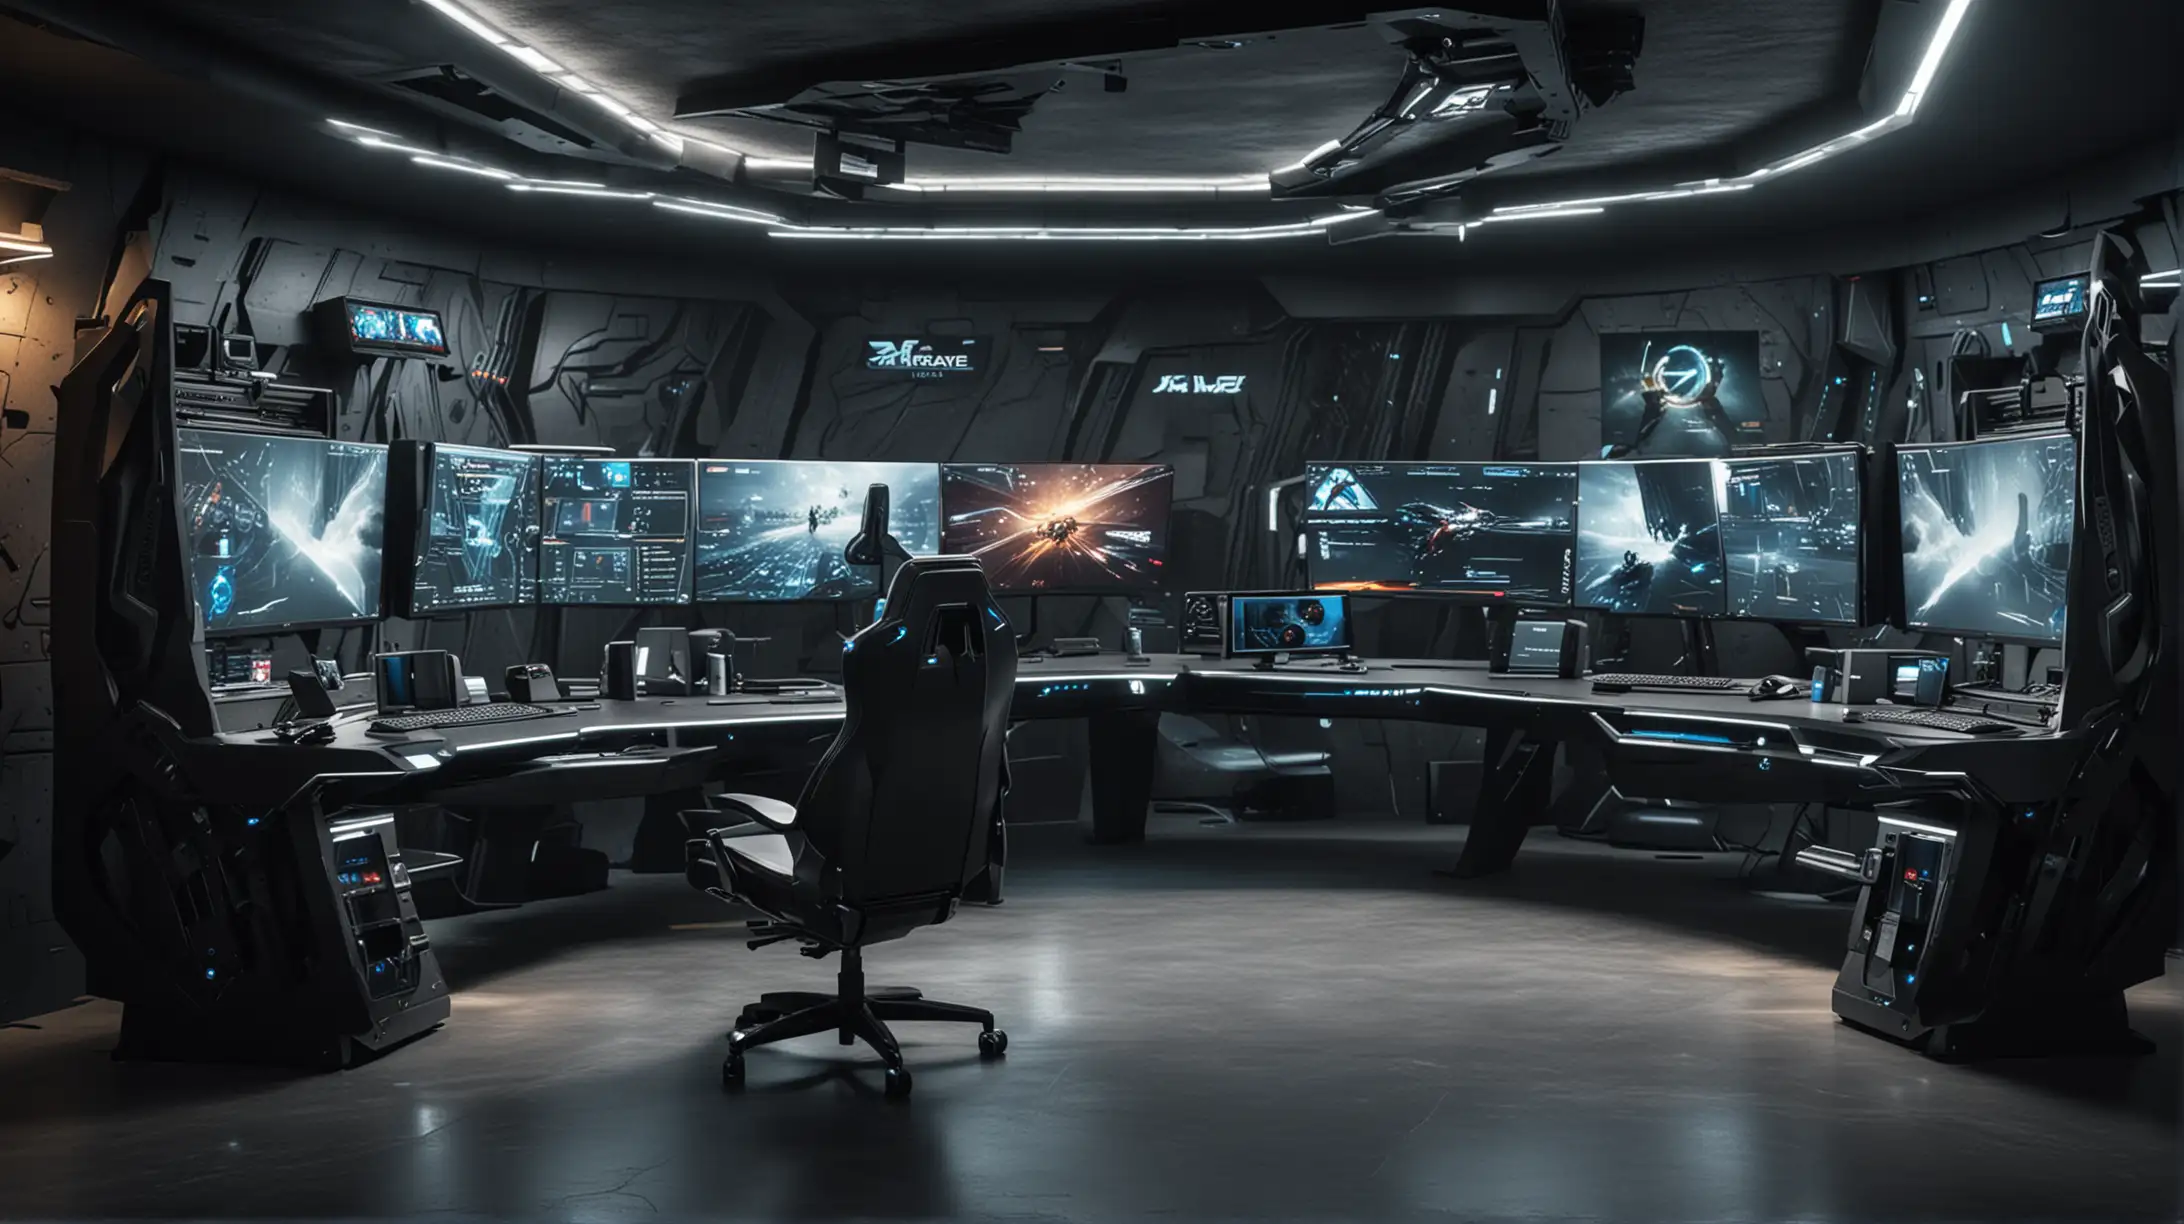 Futuristic Ergonomic Gaming Computer Cockpit Station Inspired by the Batcave